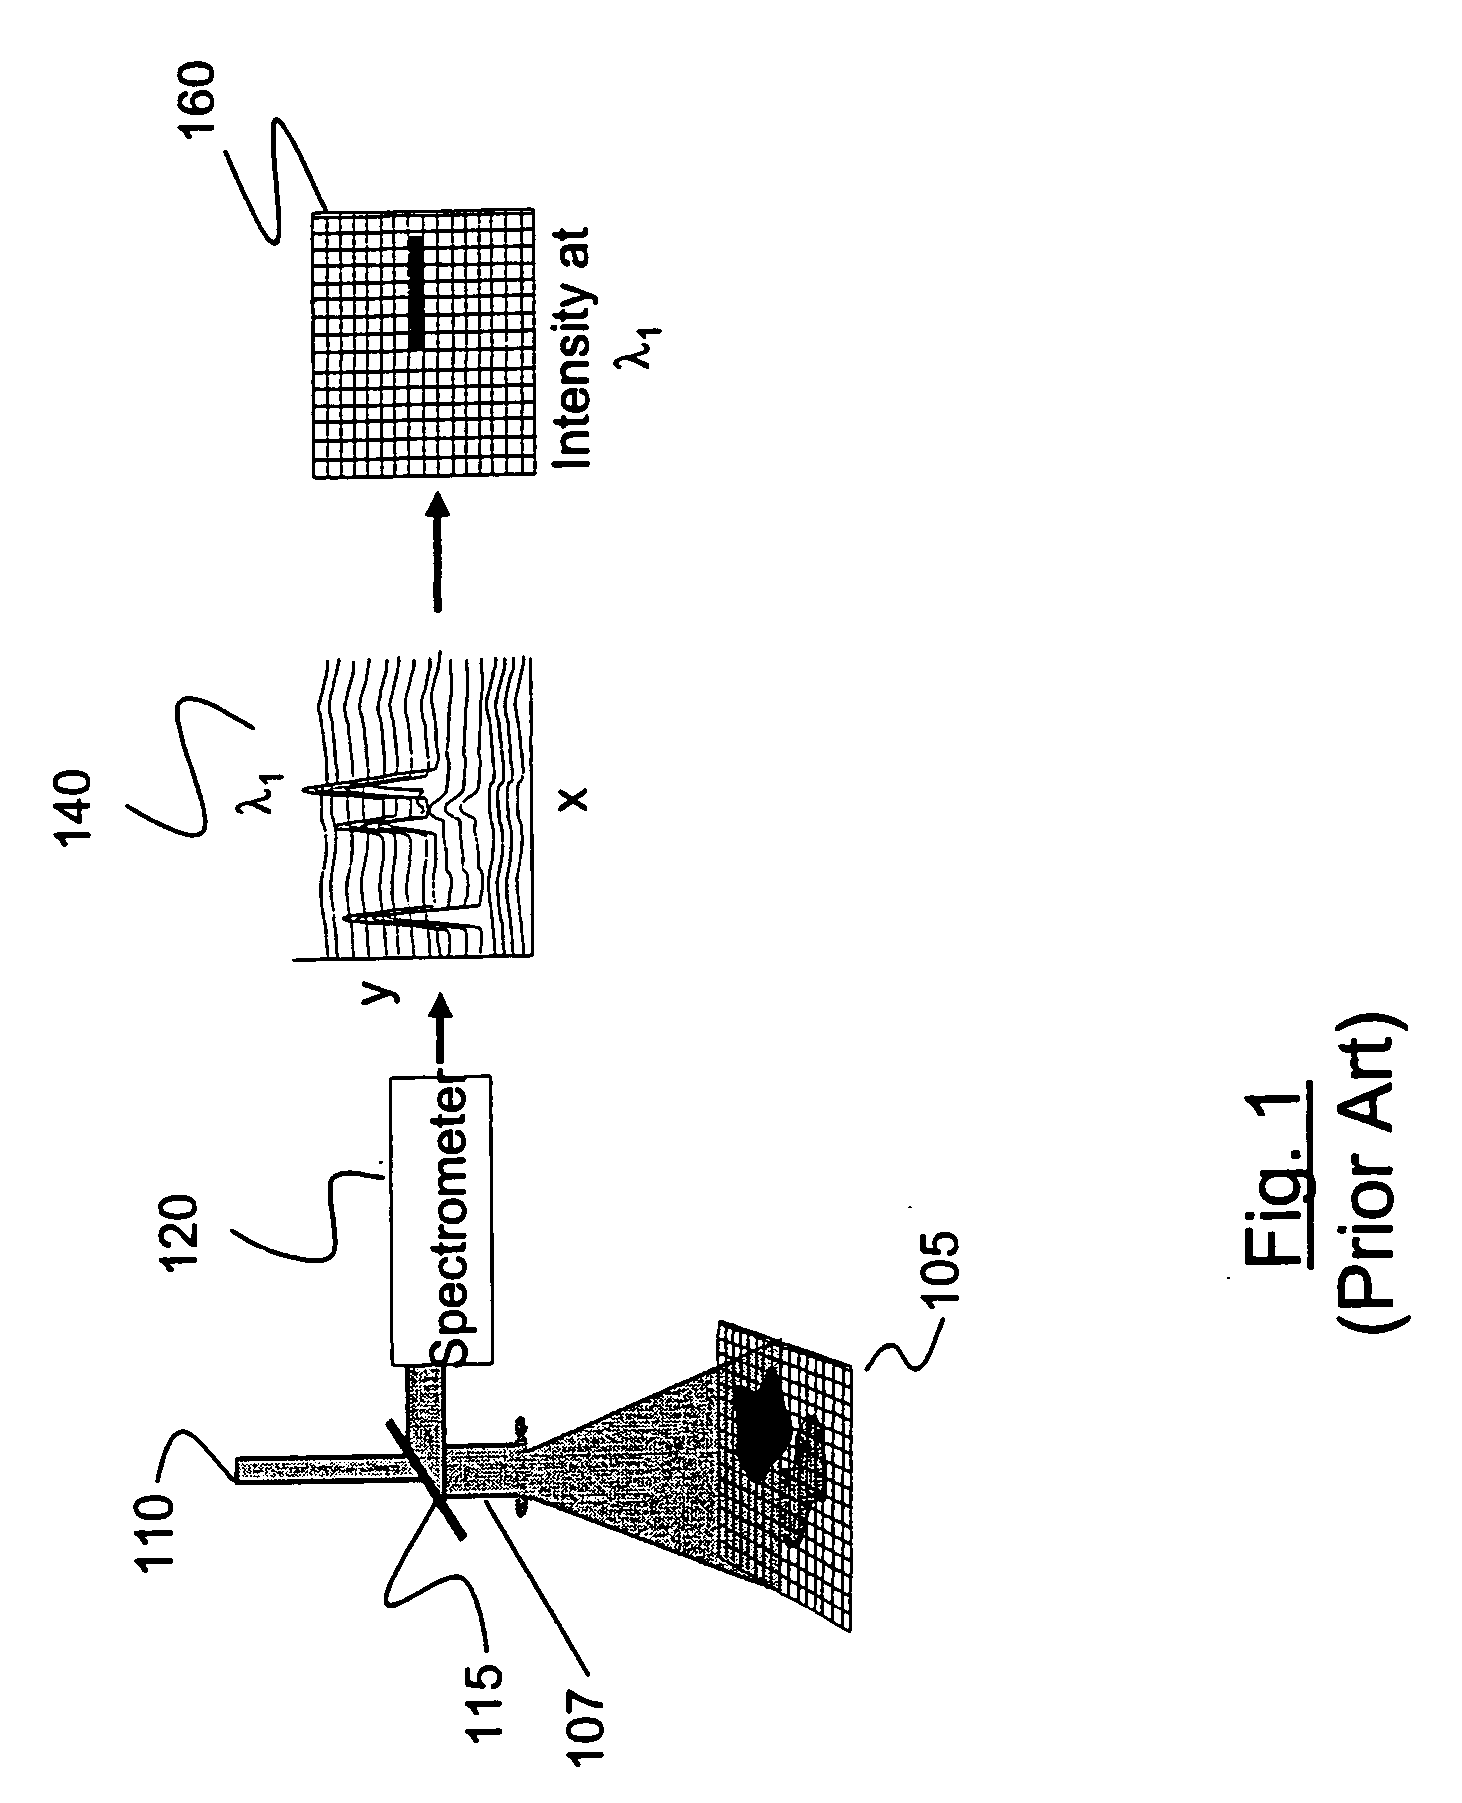 Method and apparatus for compact spectrometer for detecting hazardous agents